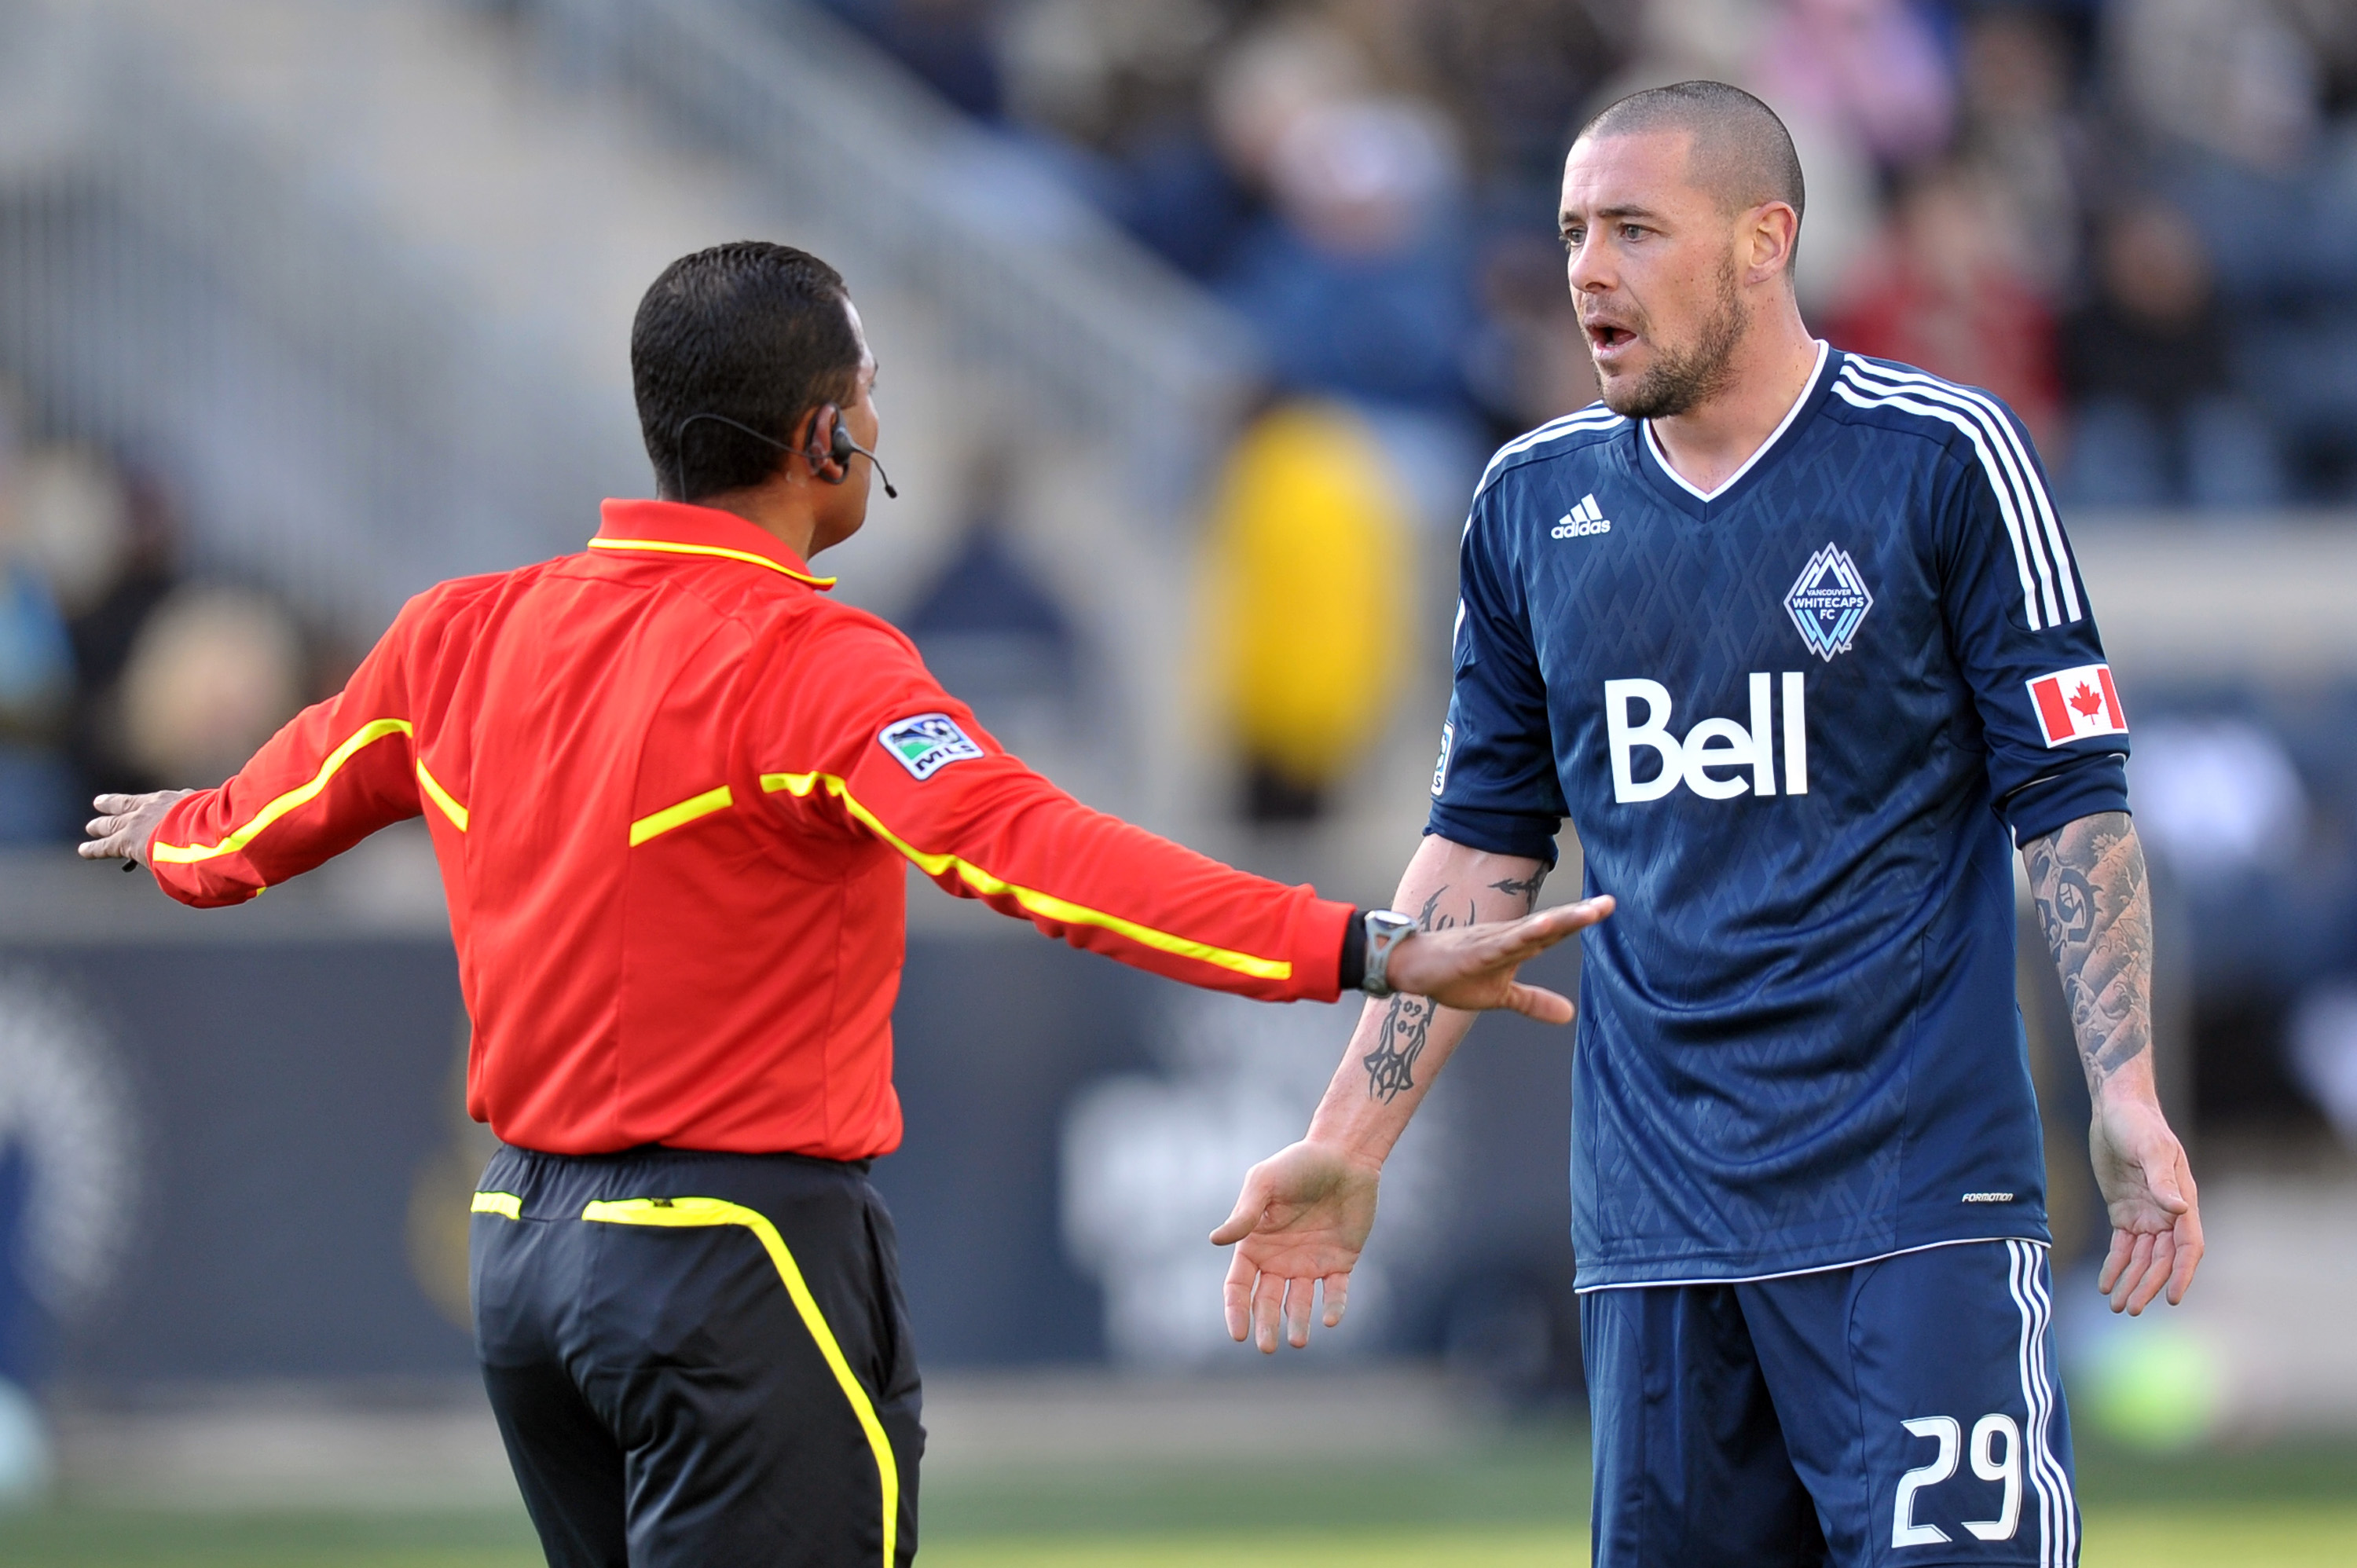 CHESTER, PA- MARCH 26: Eric Hassli #29 of the Vancouver Whitecaps argues with referee Yader Reyes during the game against the Philadelphia Union at PPL Park on March 26, 2011 in Chester, Pennsylvania. (Photo by Drew Hallowell/Getty Images)